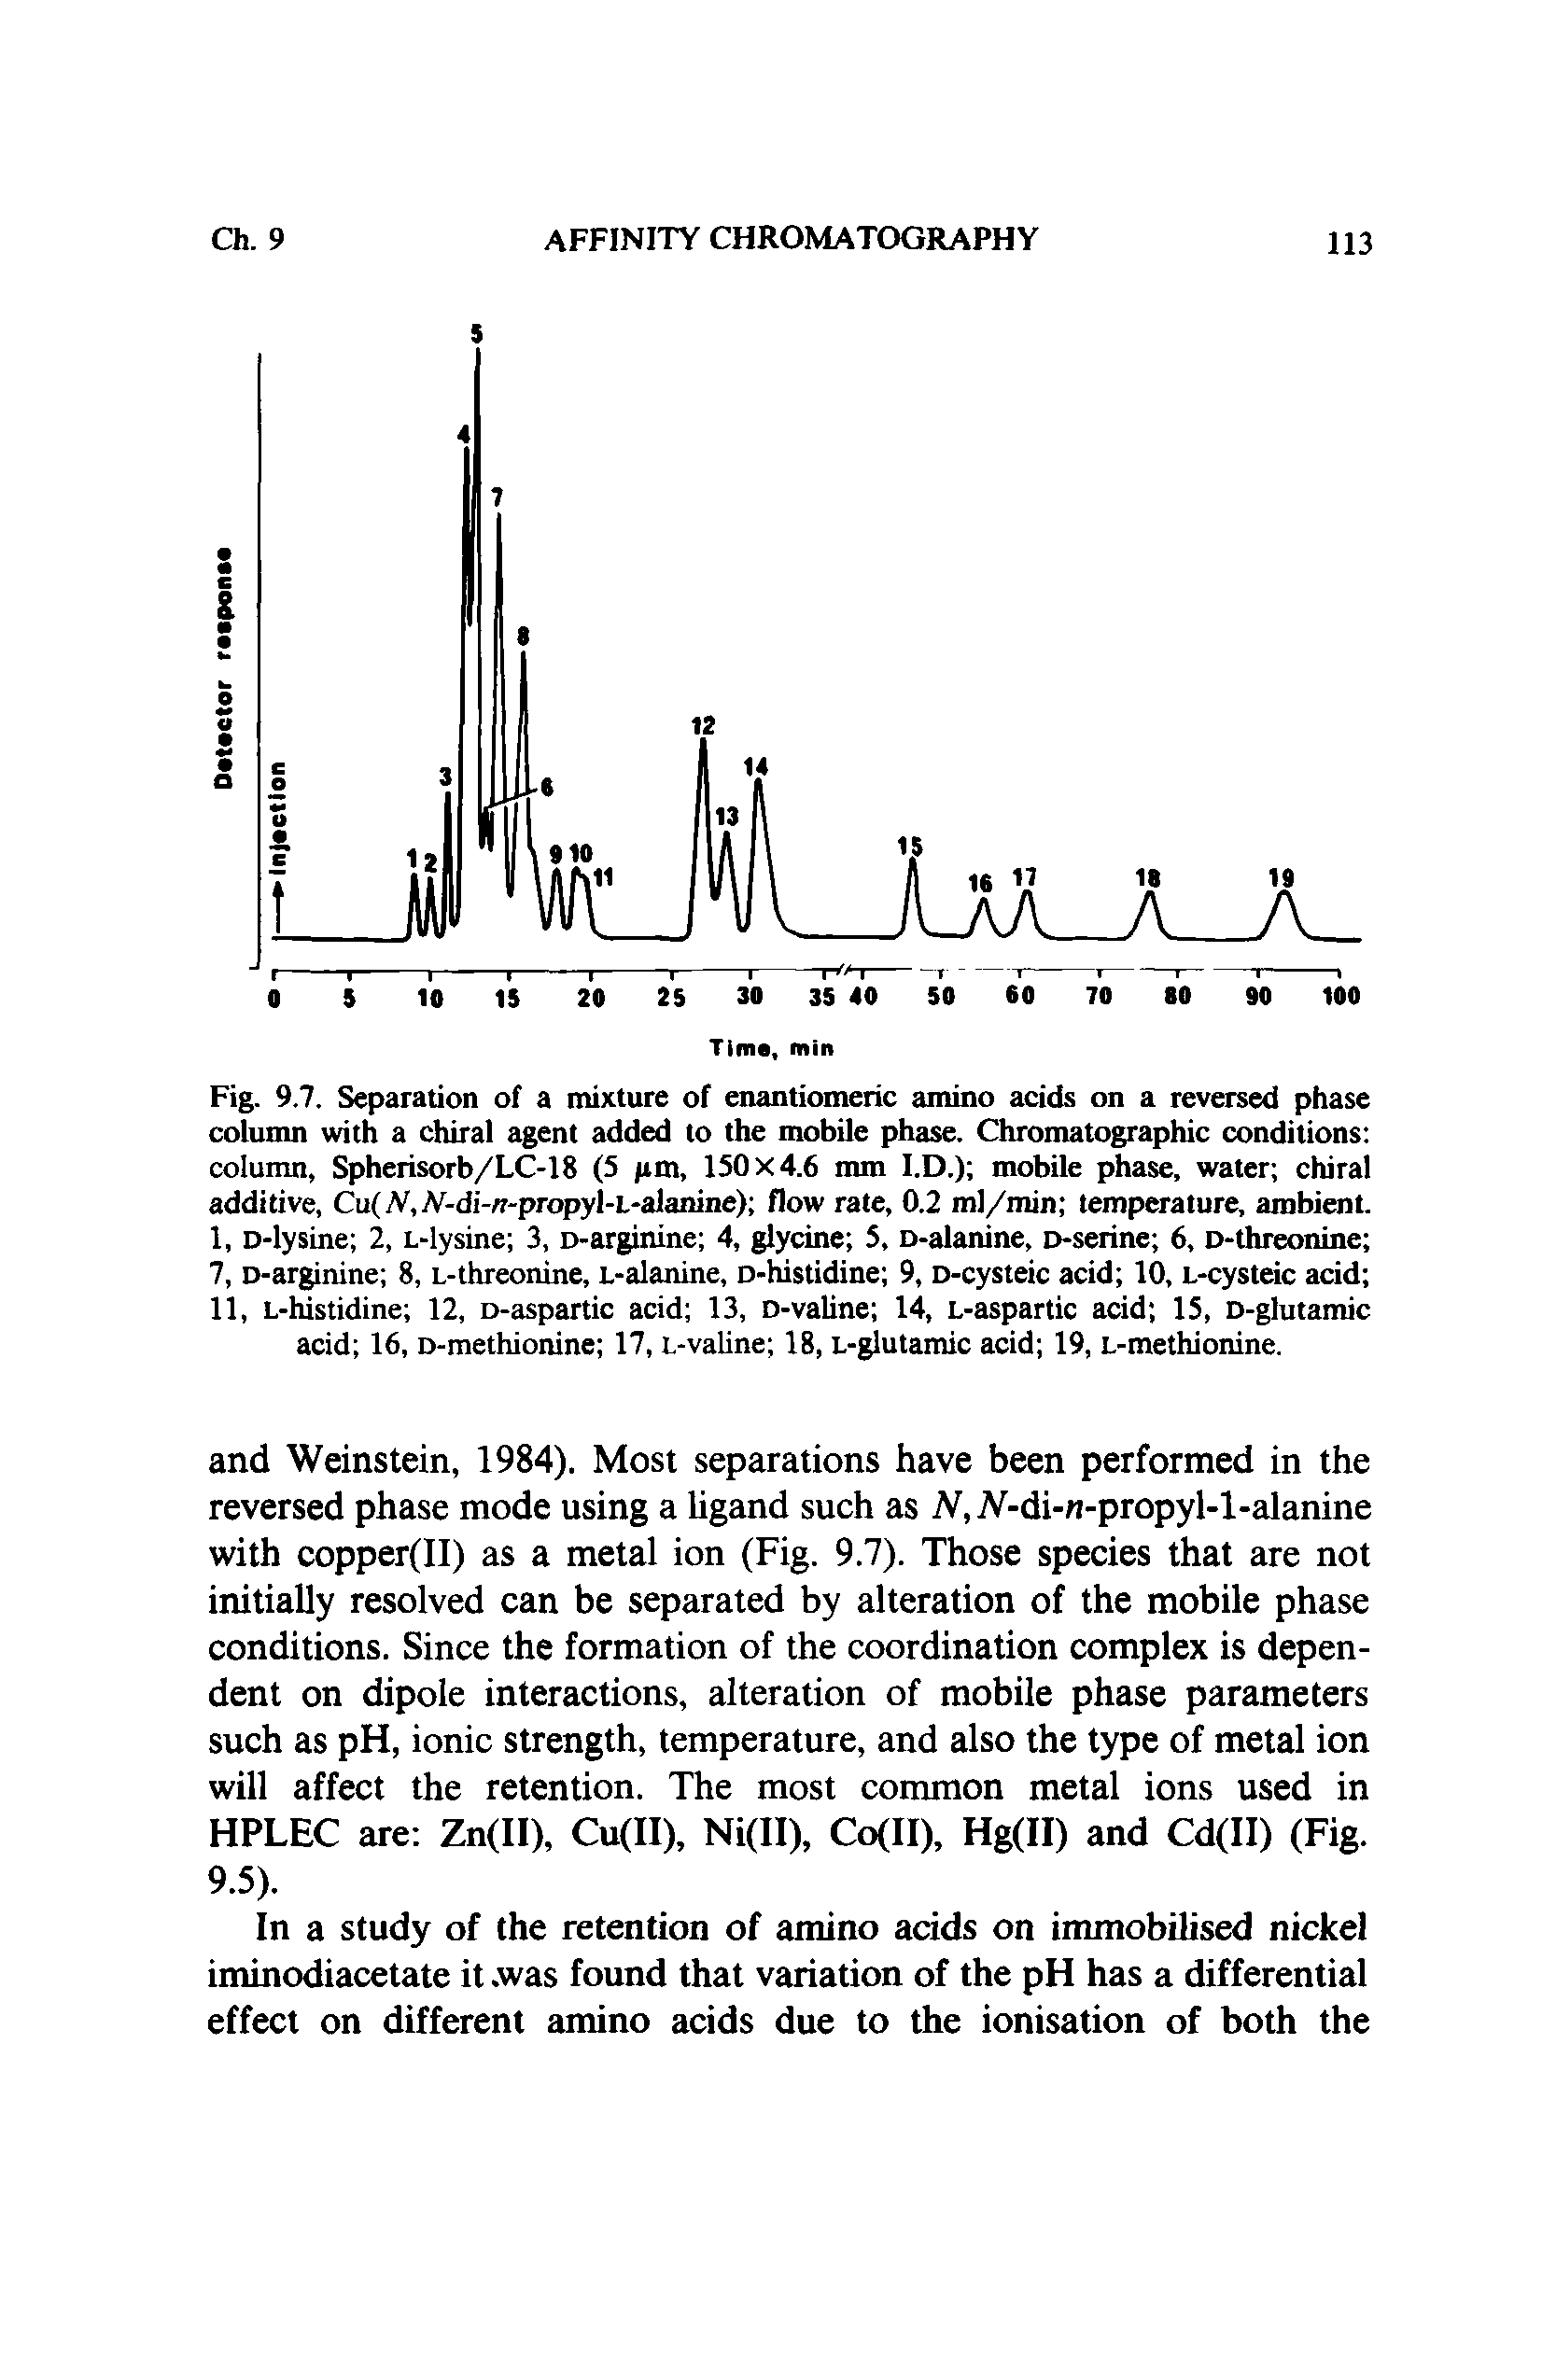 Fig. 9.7. Separation of a mixture of enantiomeric amino acids on a reversed phase column with a chiral agent added to the mobile phase. Chromatographic conditions column, Spherisorb/LC-18 (5 pm, 150x4.6 mm I.D.) mobile phase, water chiral additive, Cu(jV,A -di- r-propyl-L-alanine) flow rate, 0.2 ml/min temperature, ambient.